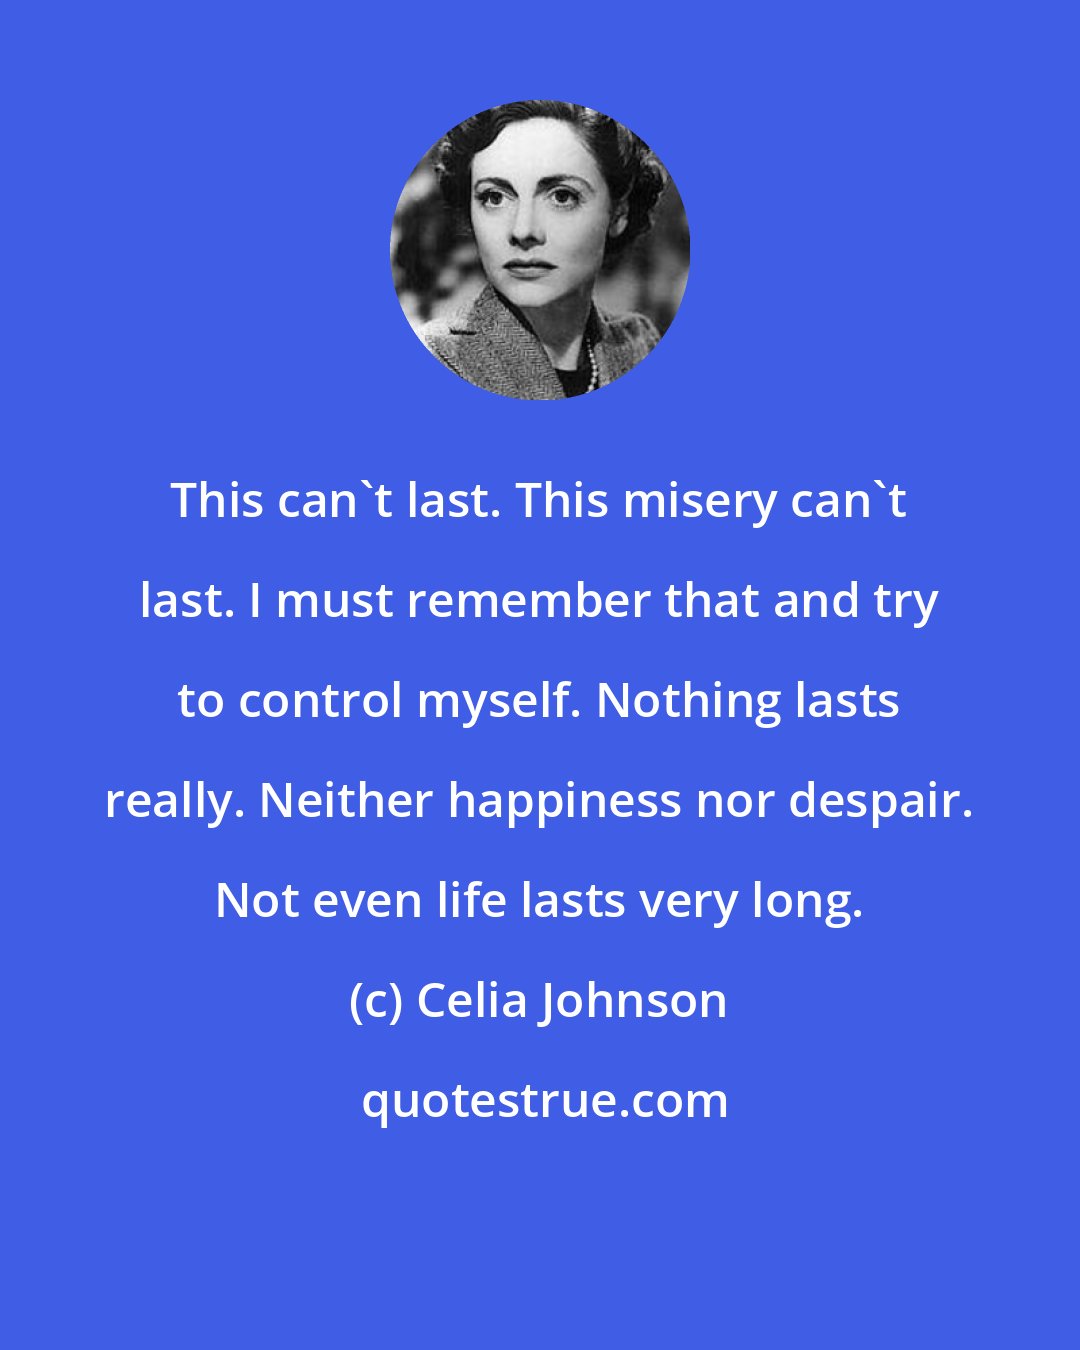 Celia Johnson: This can't last. This misery can't last. I must remember that and try to control myself. Nothing lasts really. Neither happiness nor despair. Not even life lasts very long.